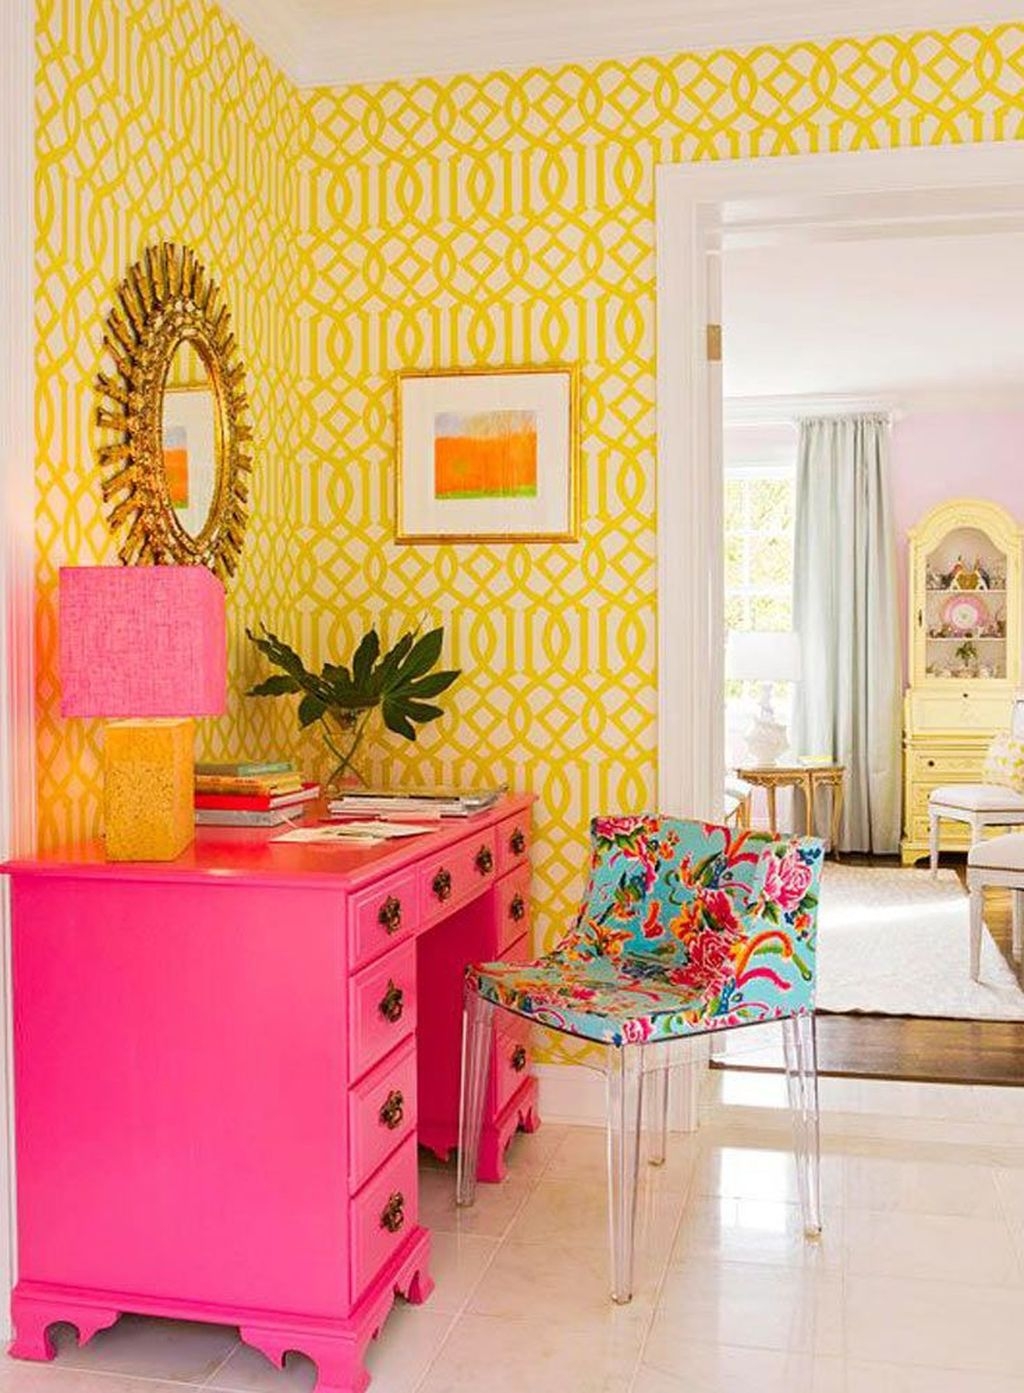 Best Ideas To Bring A Pop Of Bright Color Into Your Interior Design 34